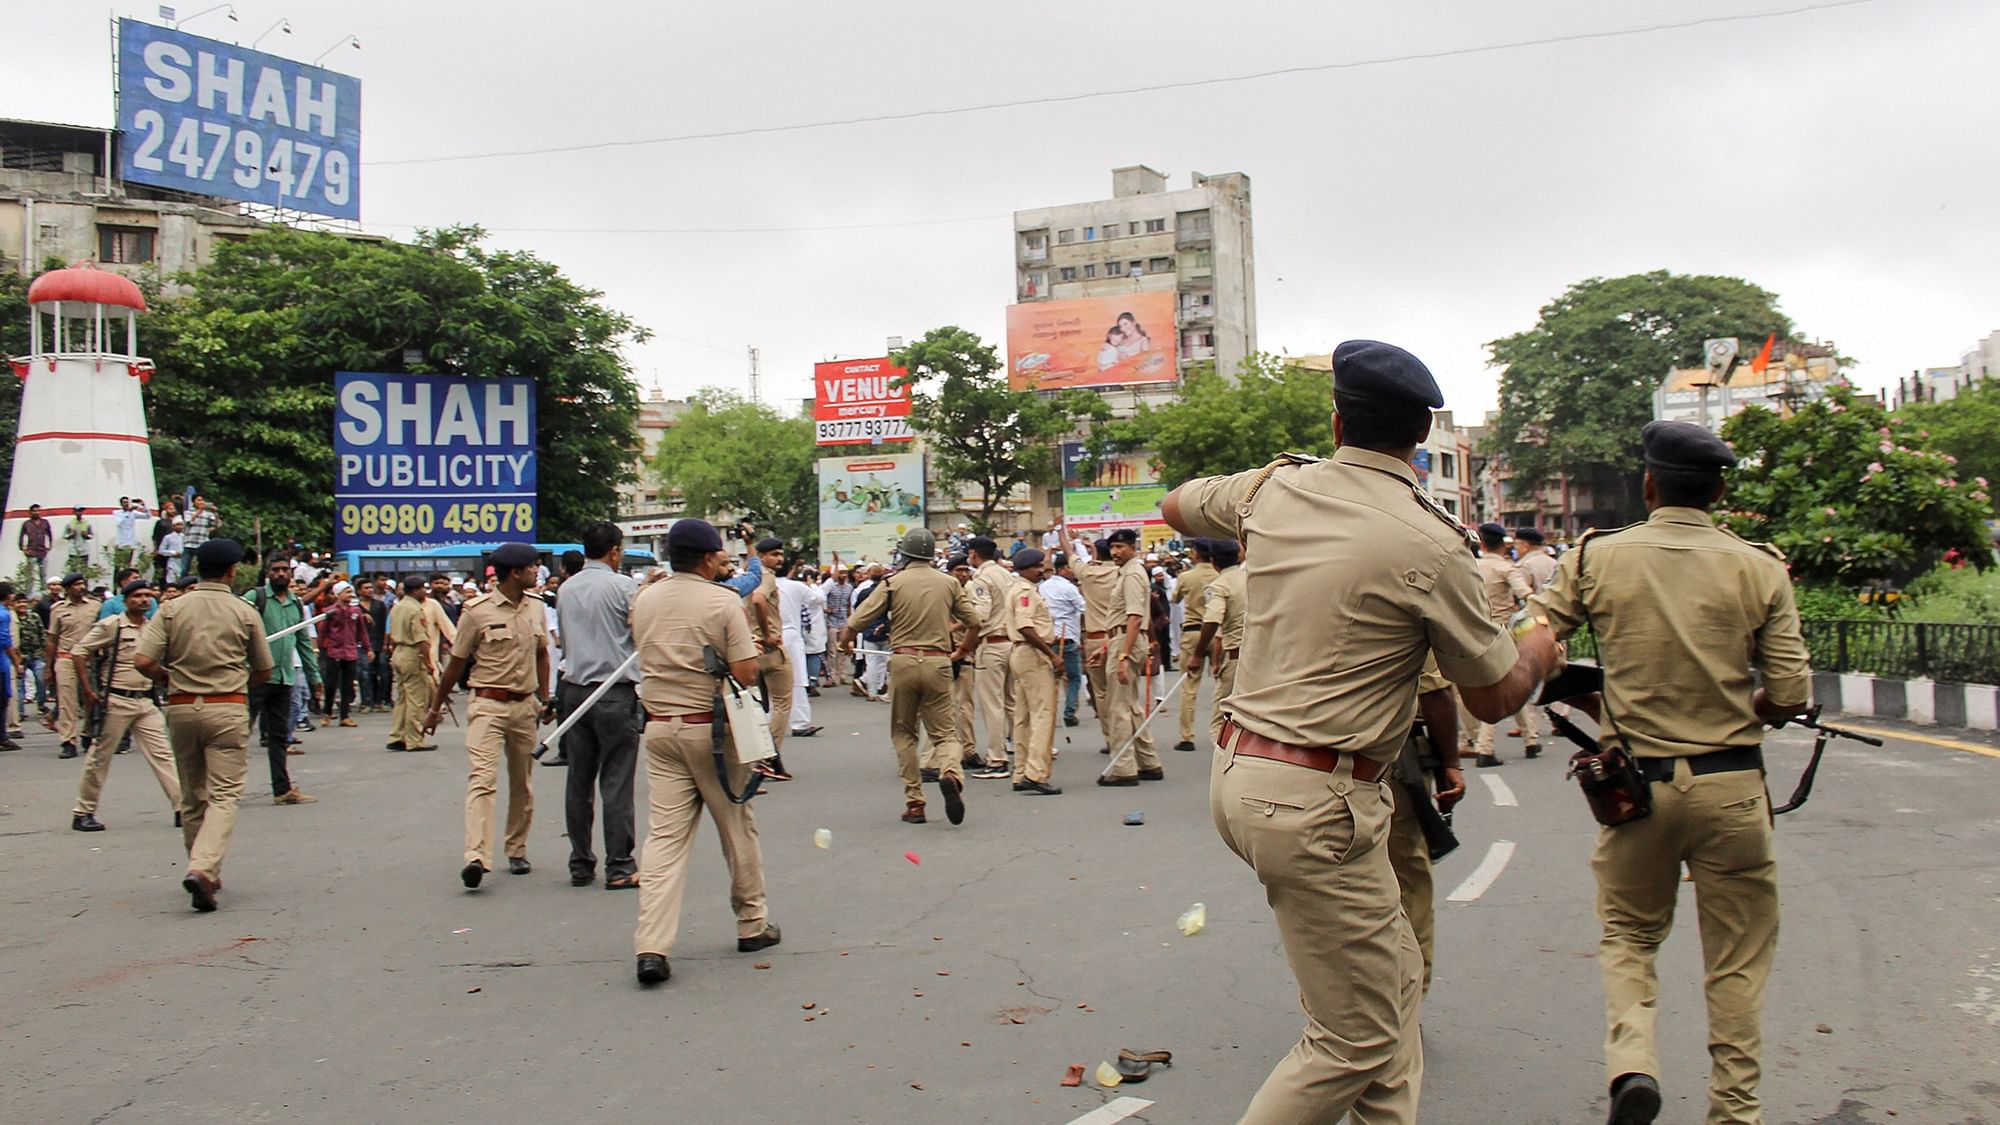 Policemen chase away protestors during a rally against incidents of mob lynching, in Surat on 5 July 2019.&nbsp;